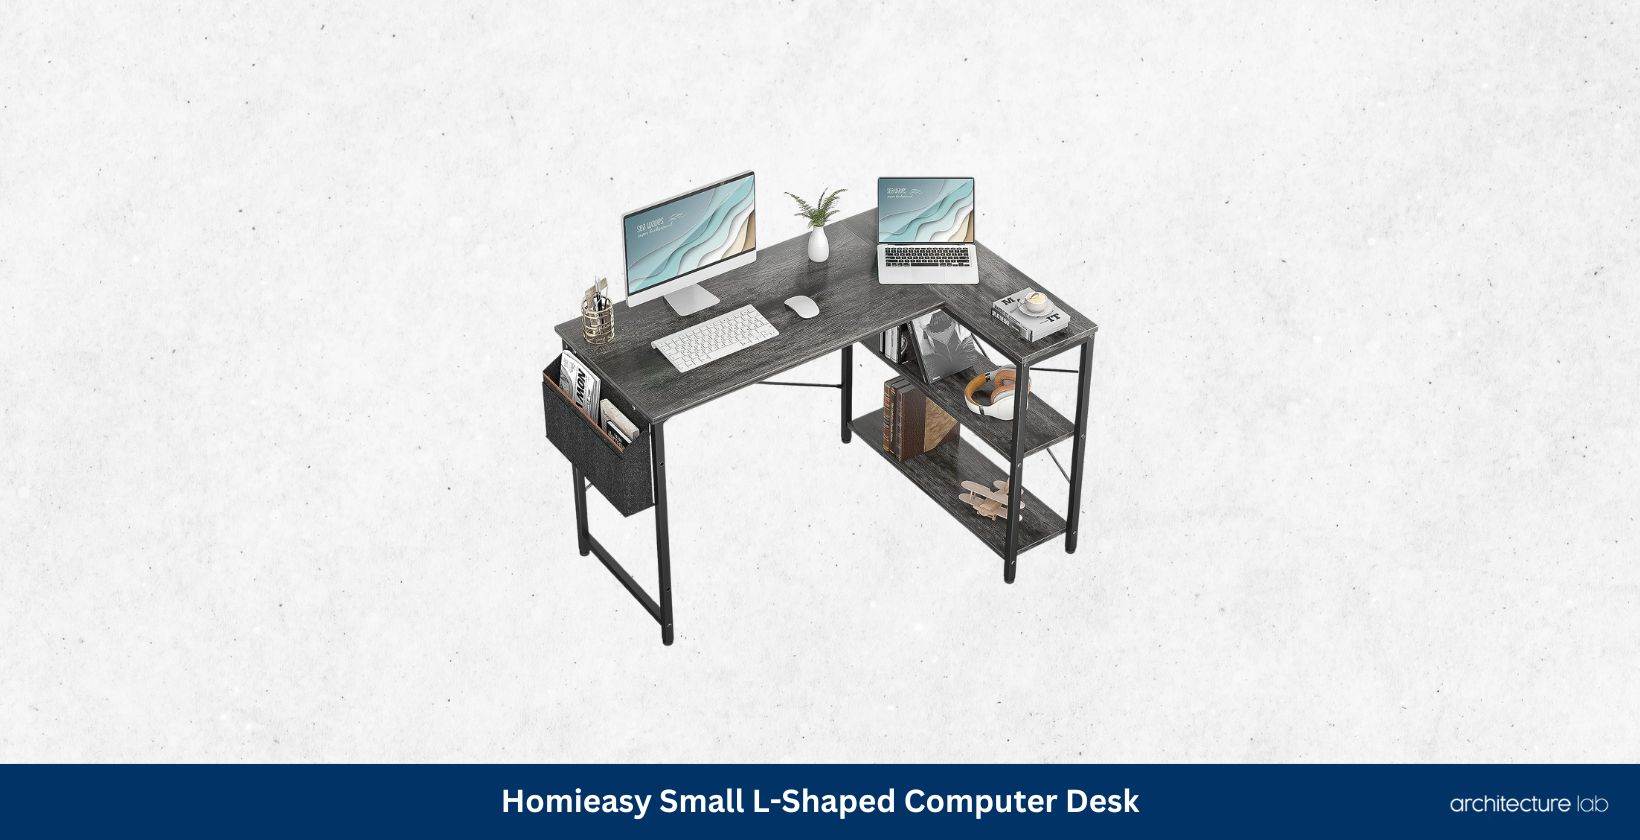 Homieasy small l shaped computer desk